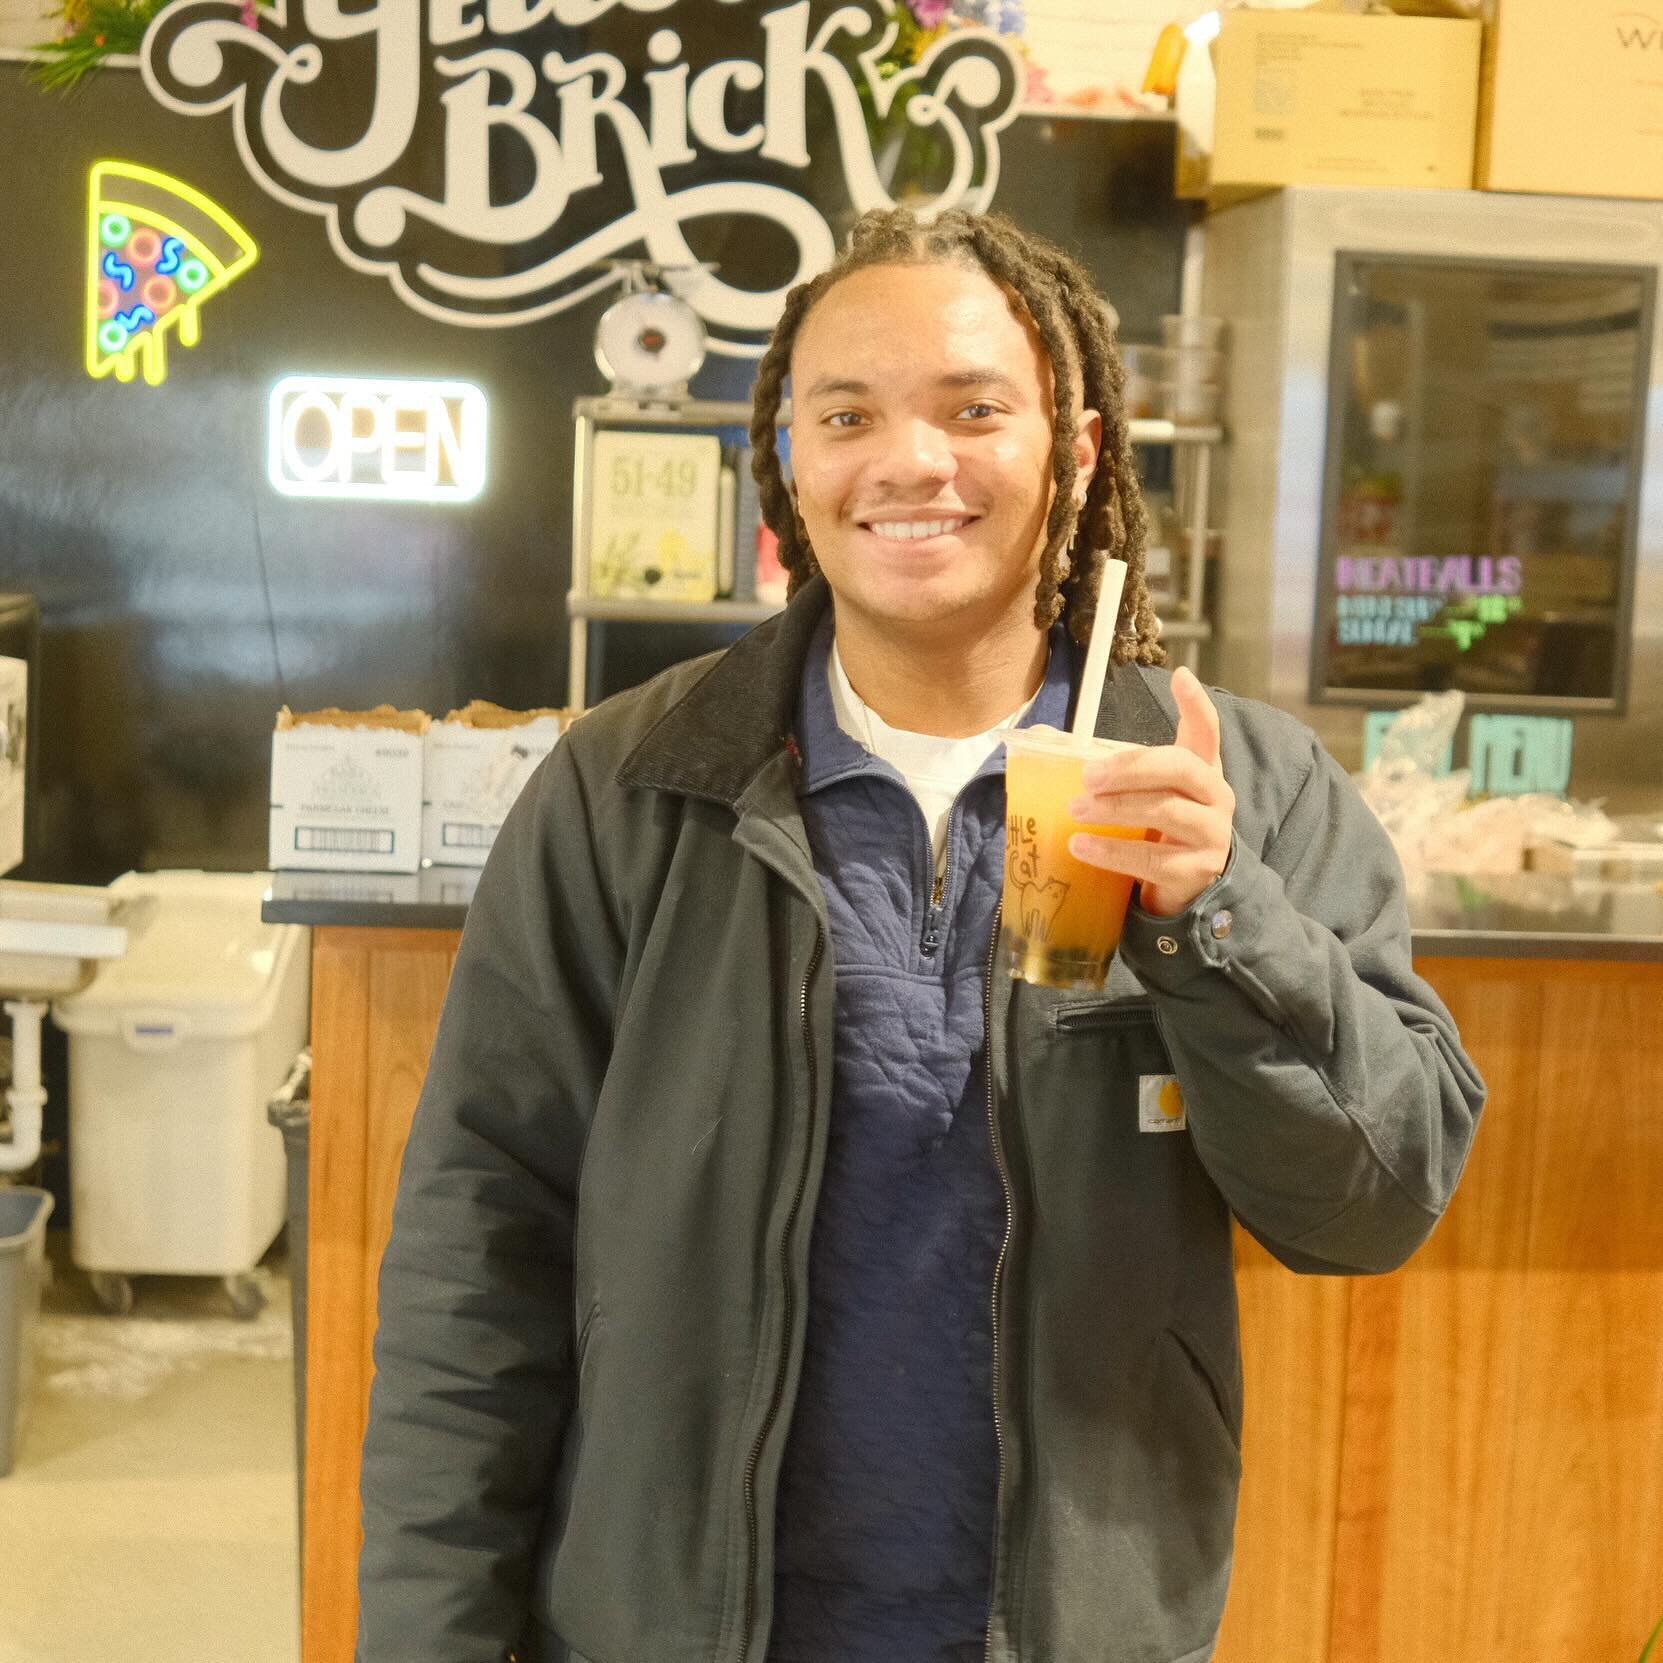 a spotlight on one of our OG regulars, Miles! throughout the year, we&rsquo;ve seen him make great strides in his career and grad school aspirations. 🫡